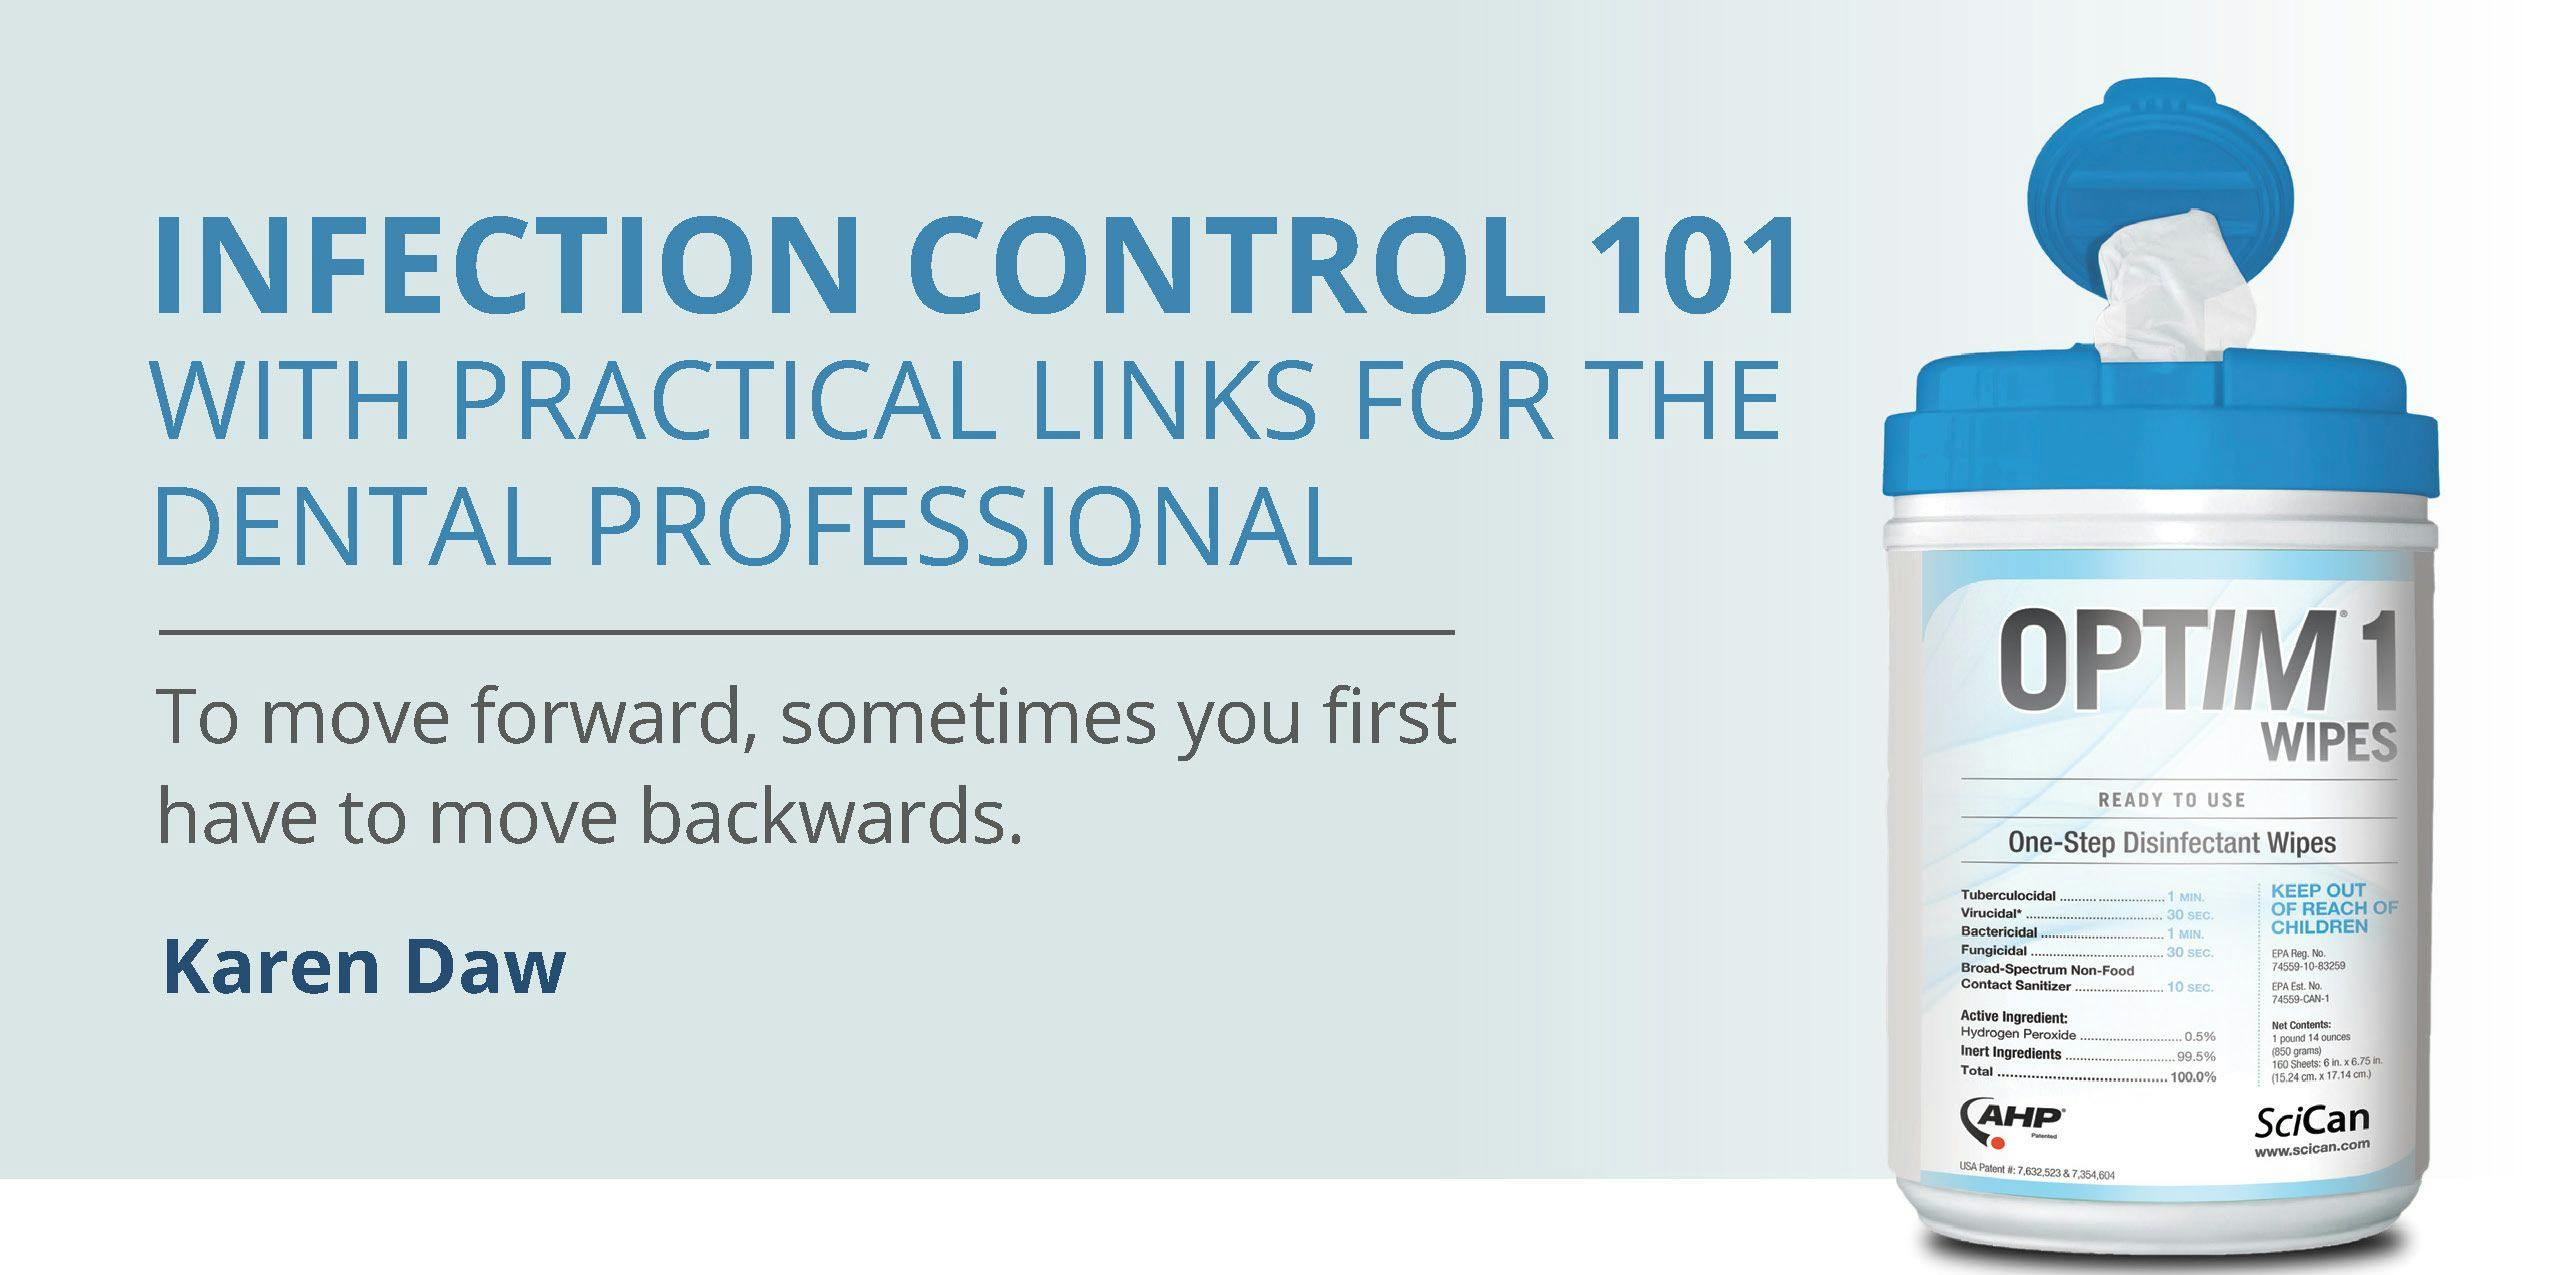 Infection Control 101: With Practical Links for the Dental Professional